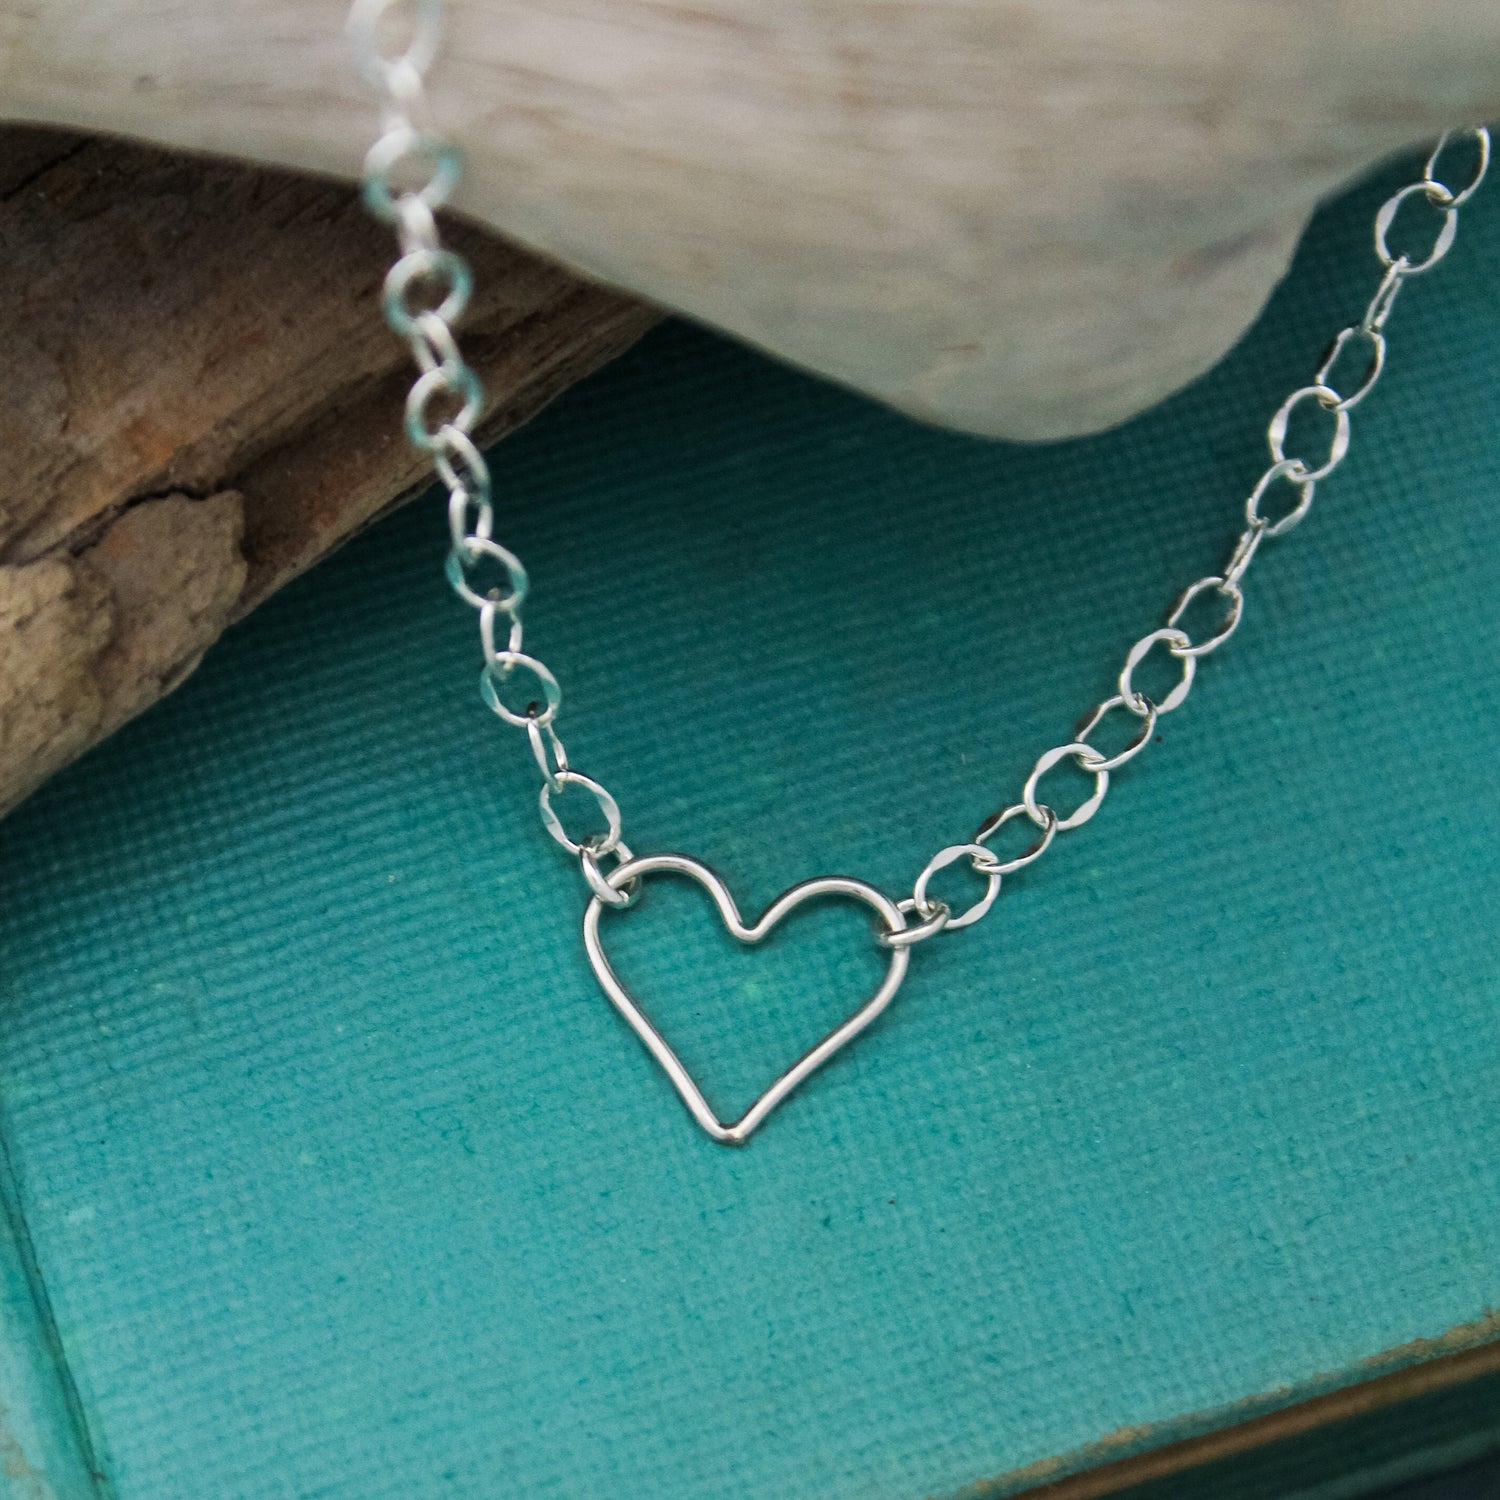 Heart Anklet, Birthday Gift, Summer Jewelry, Love Heart Jewelry, Sterling Silver Anklet, Gifts for Her, Summer Cruise Jewelry